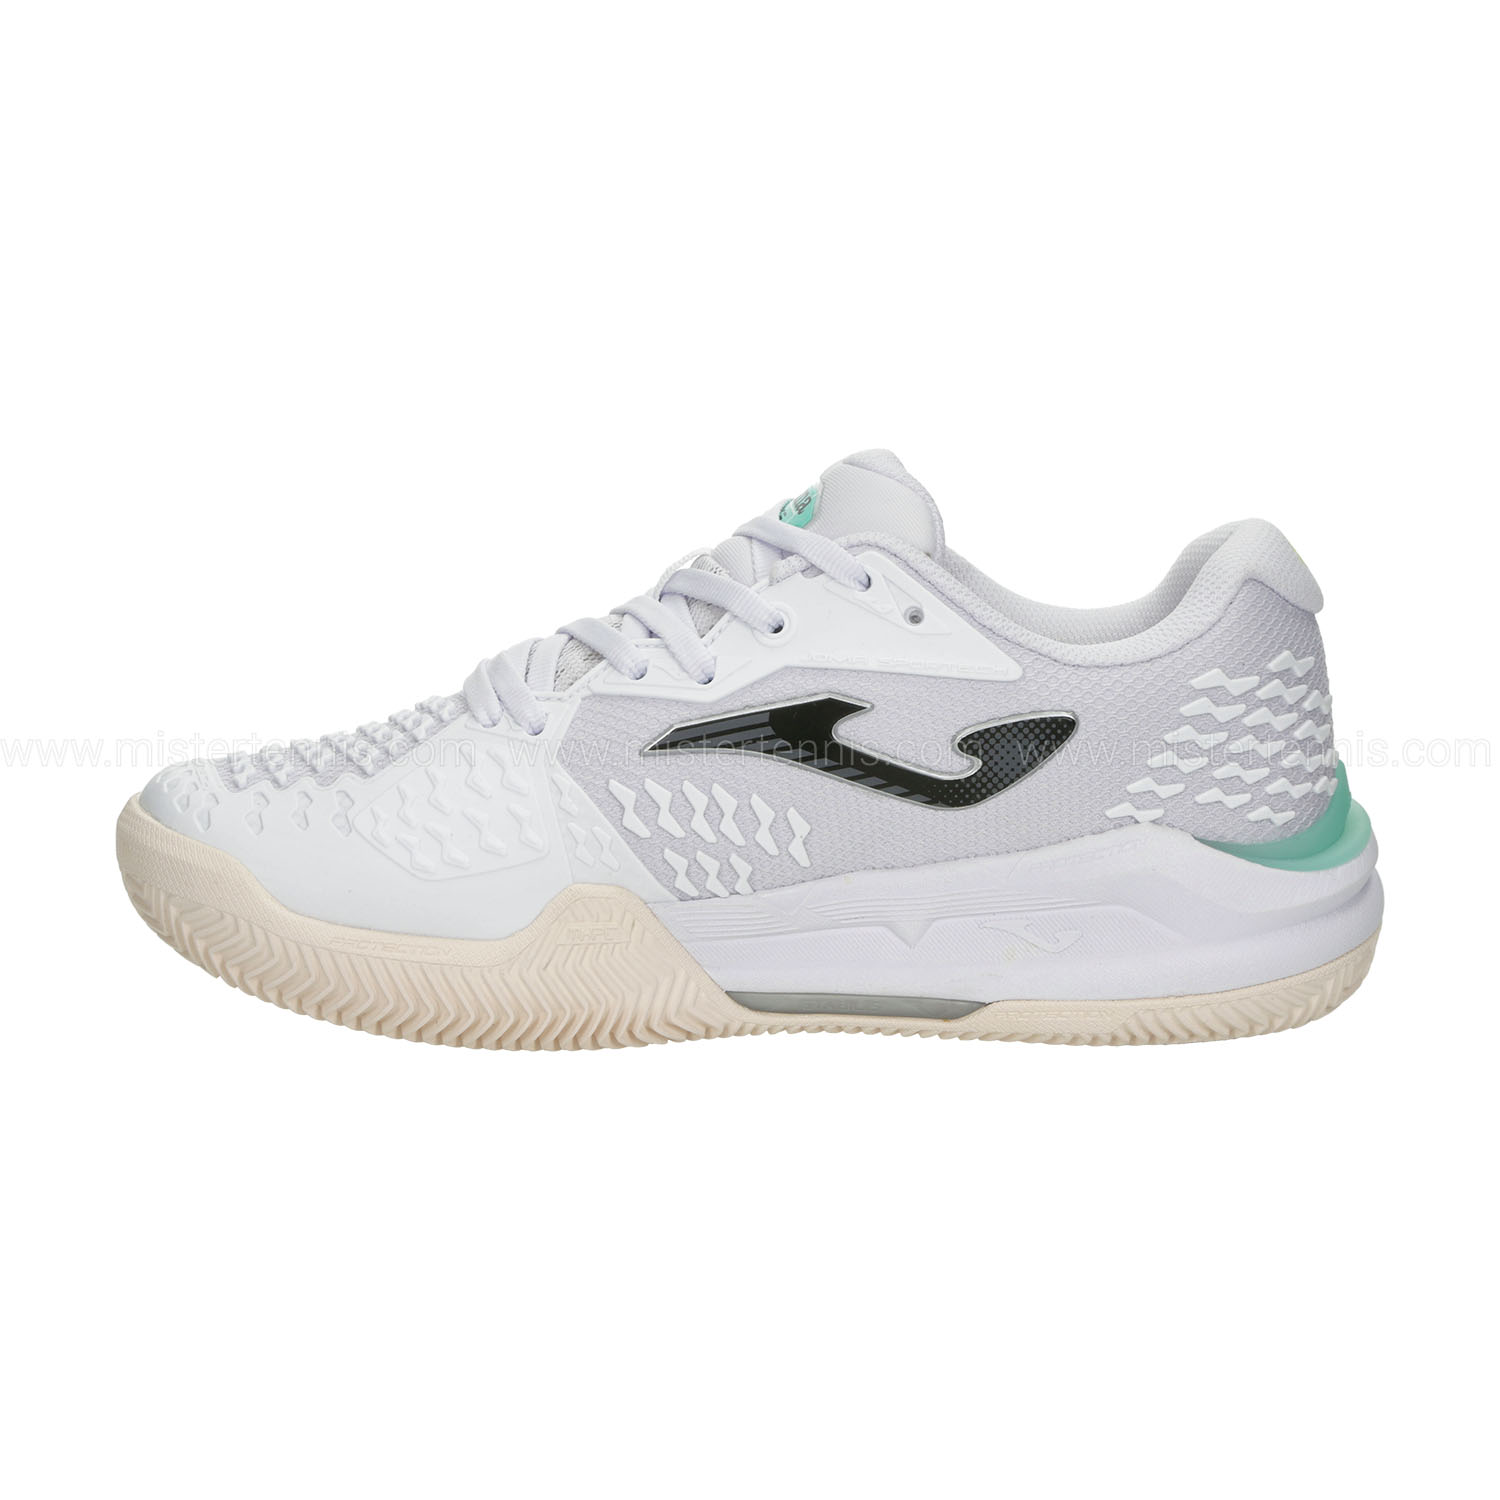 Joma Ace Carbon Clay - White/Green